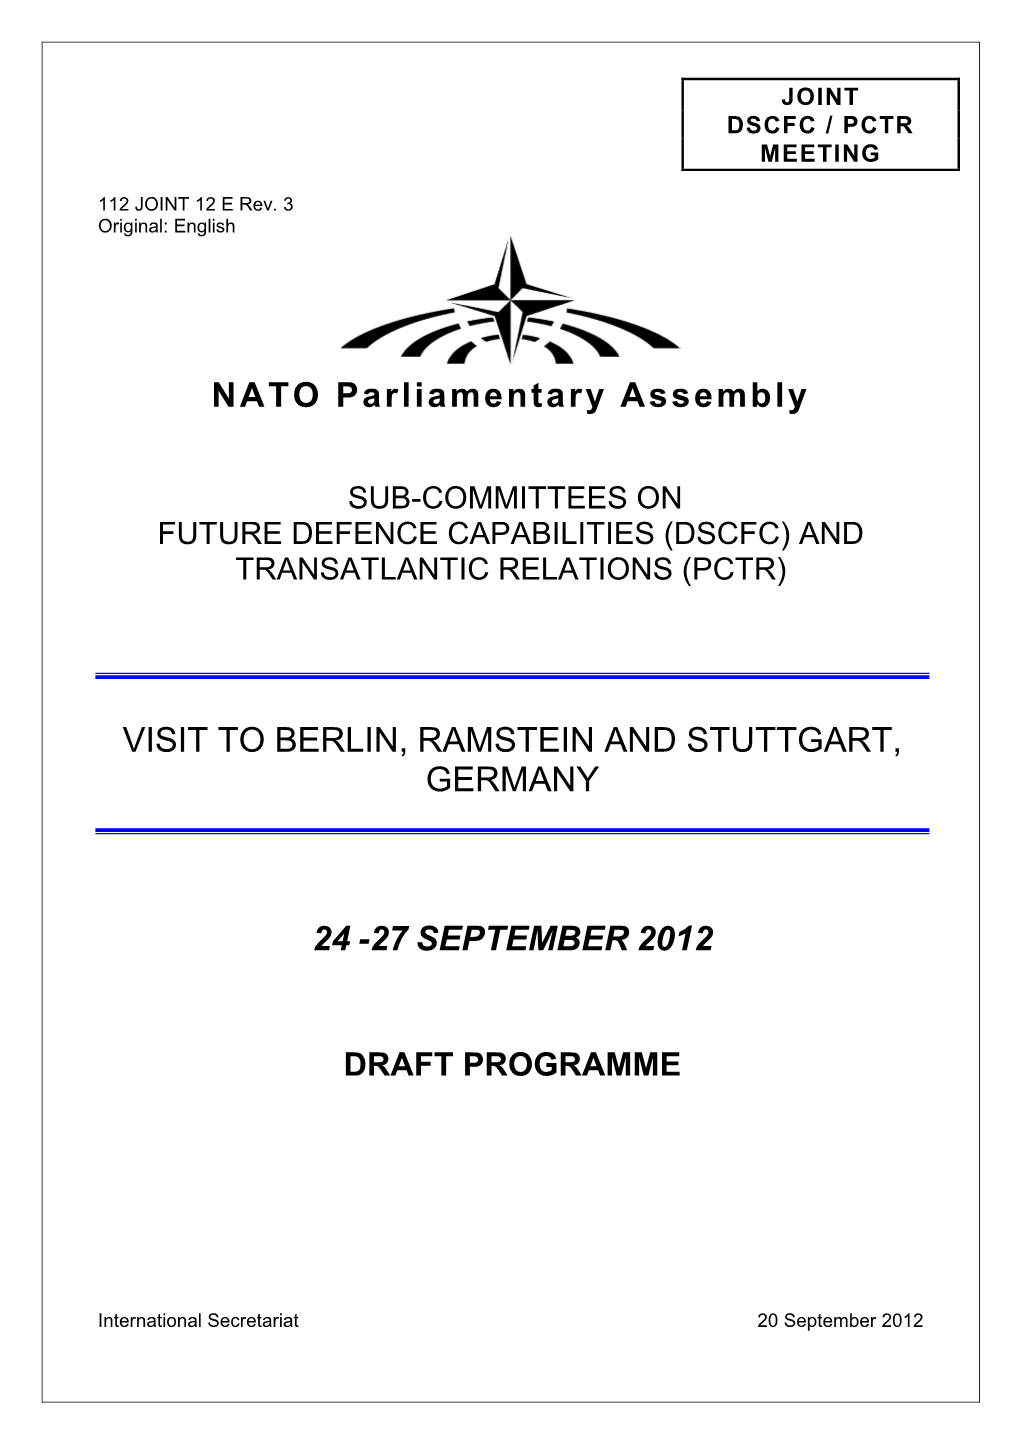 NATO Parliamentary Assembly VISIT to BERLIN, RAMSTEIN AND